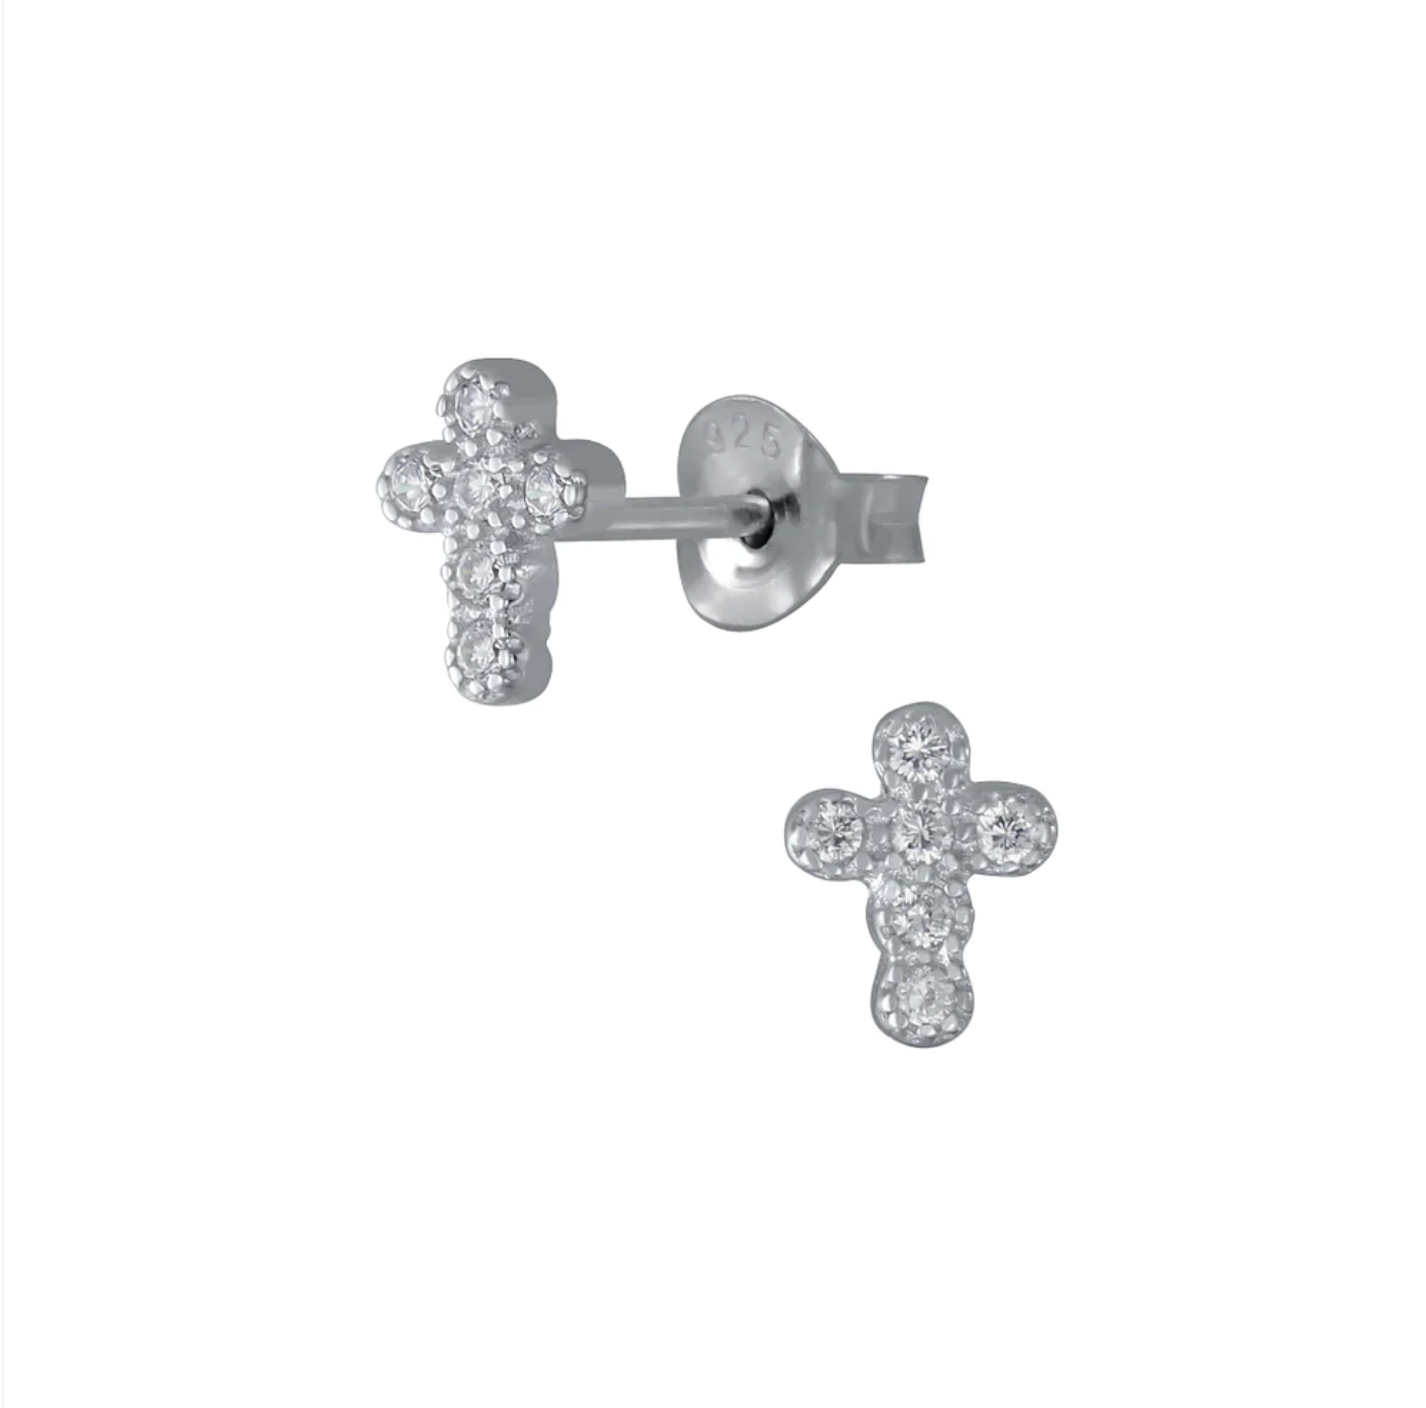 The Lucy Nash Adina Stud includes beautiful CZ details.